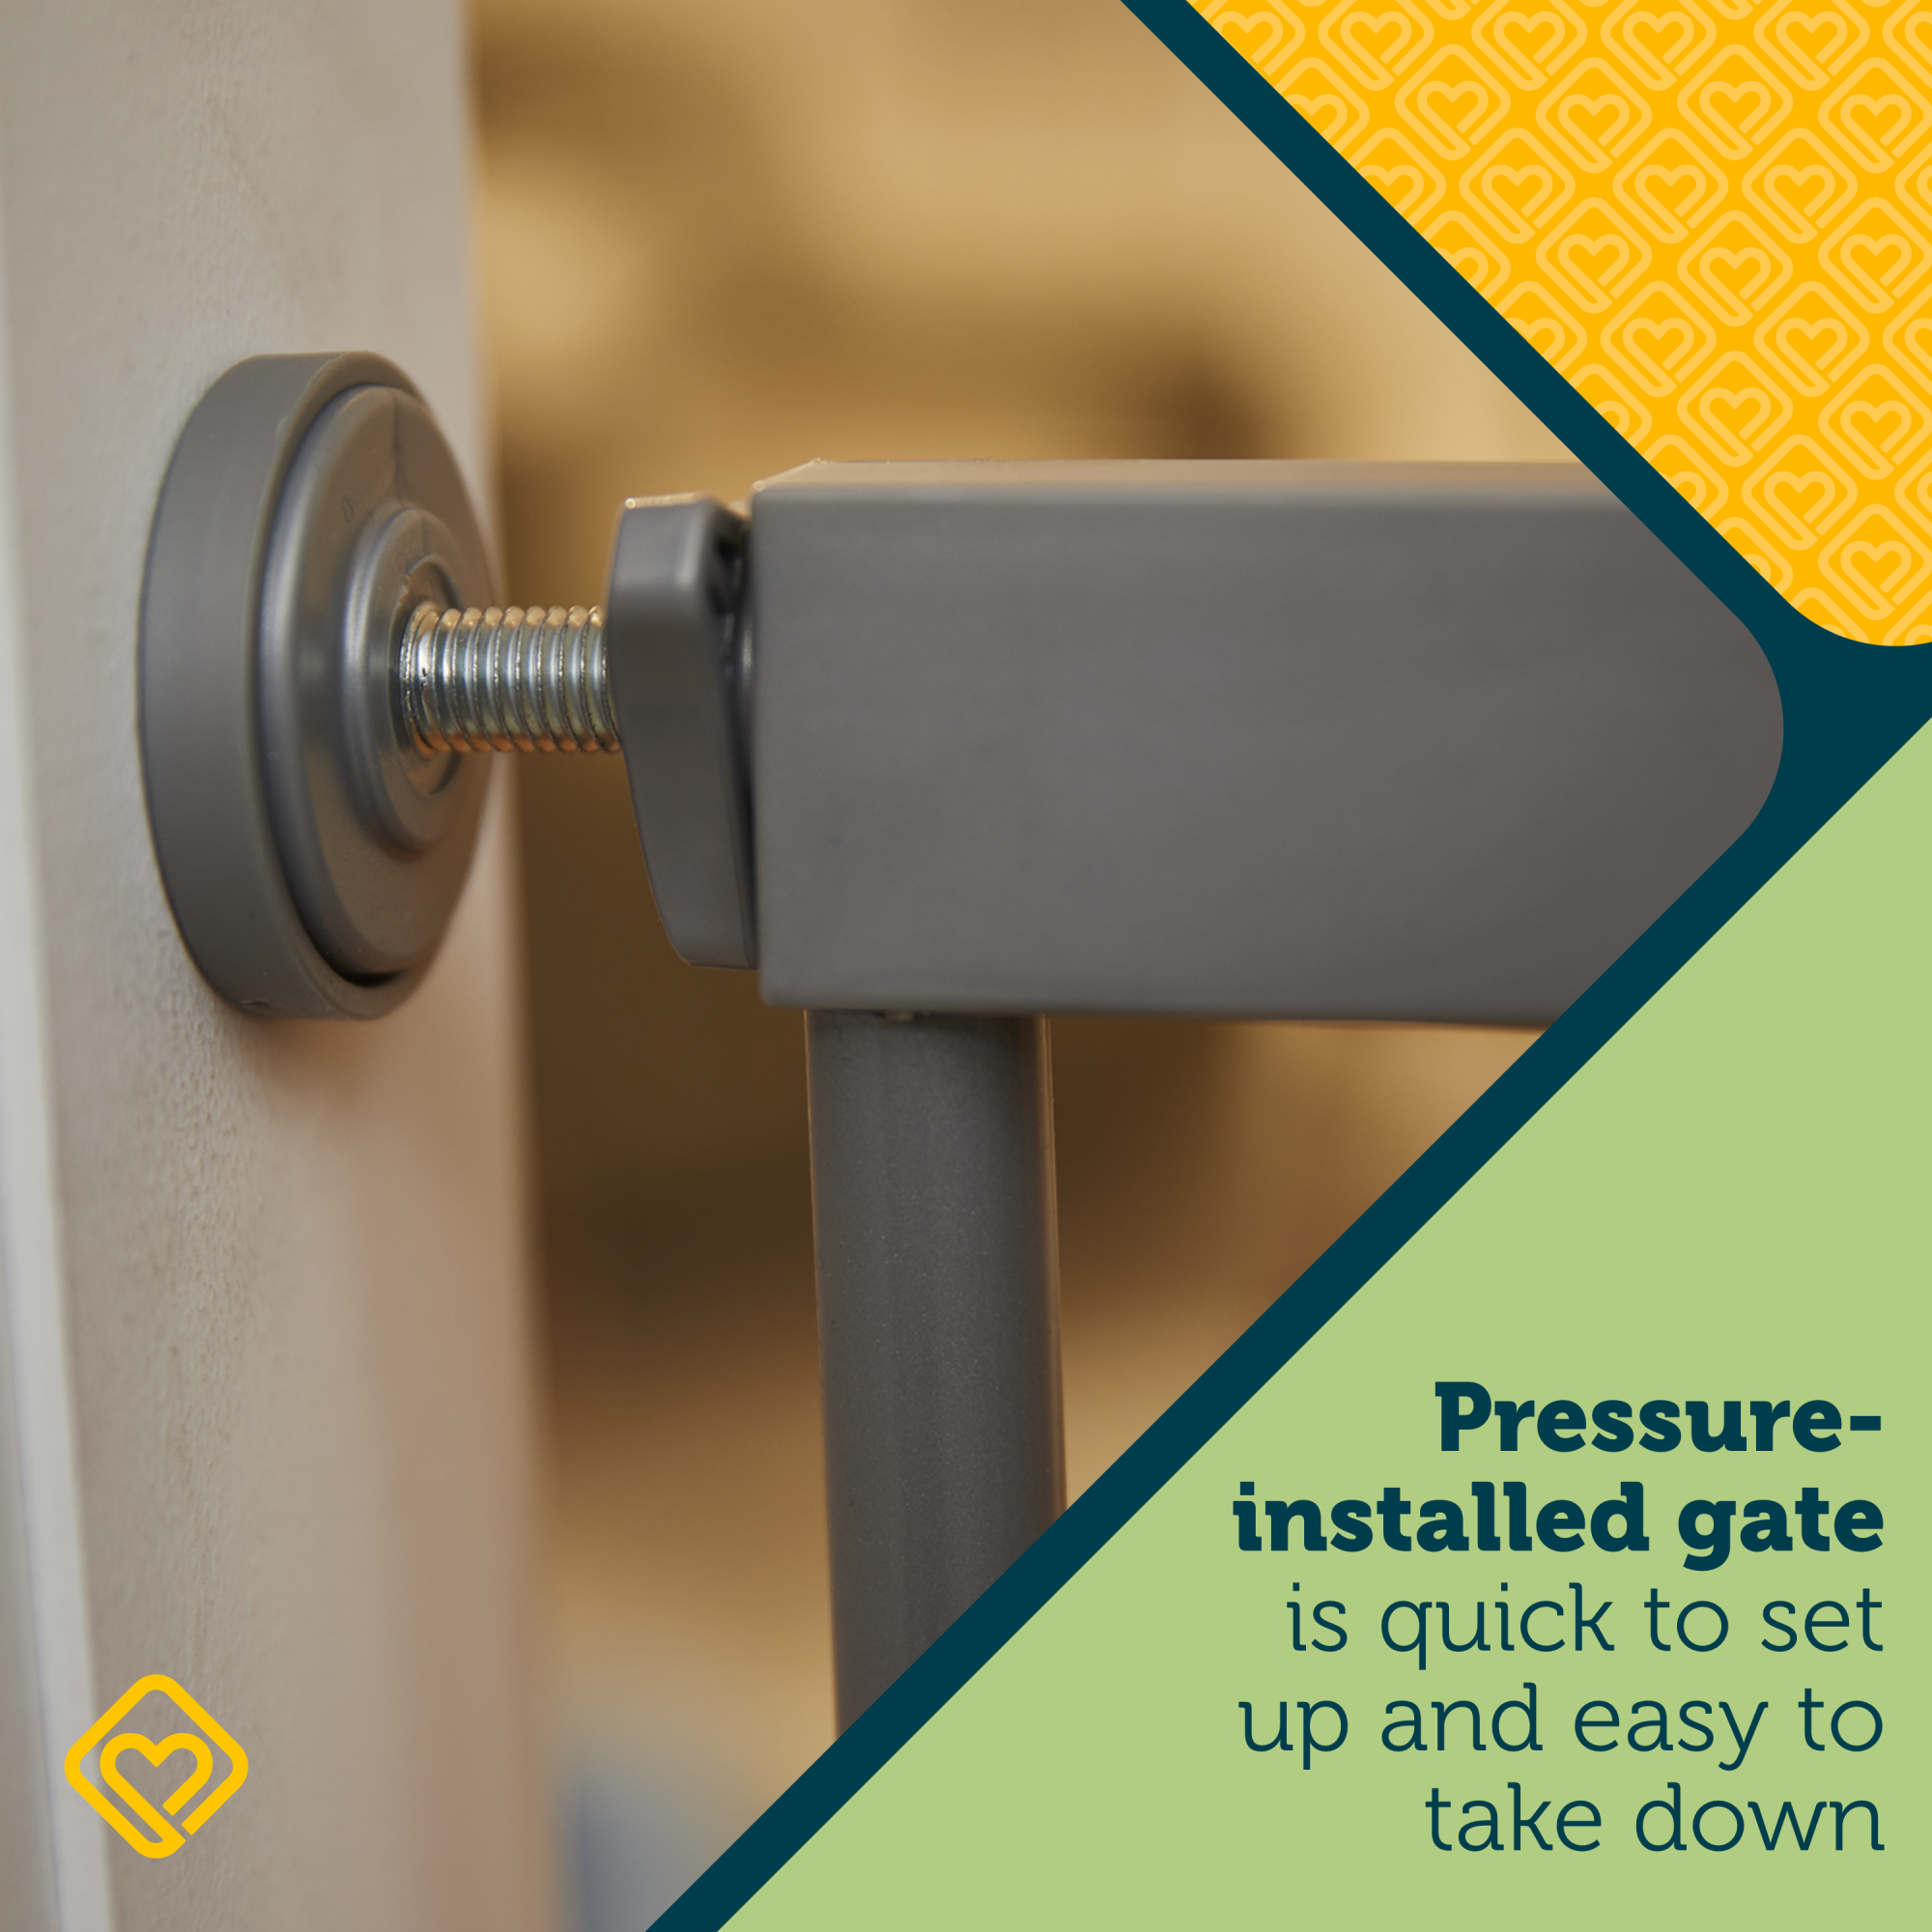 Modern Easy-Install Gate - pressure-installed gate is quick to set up and easy to take down